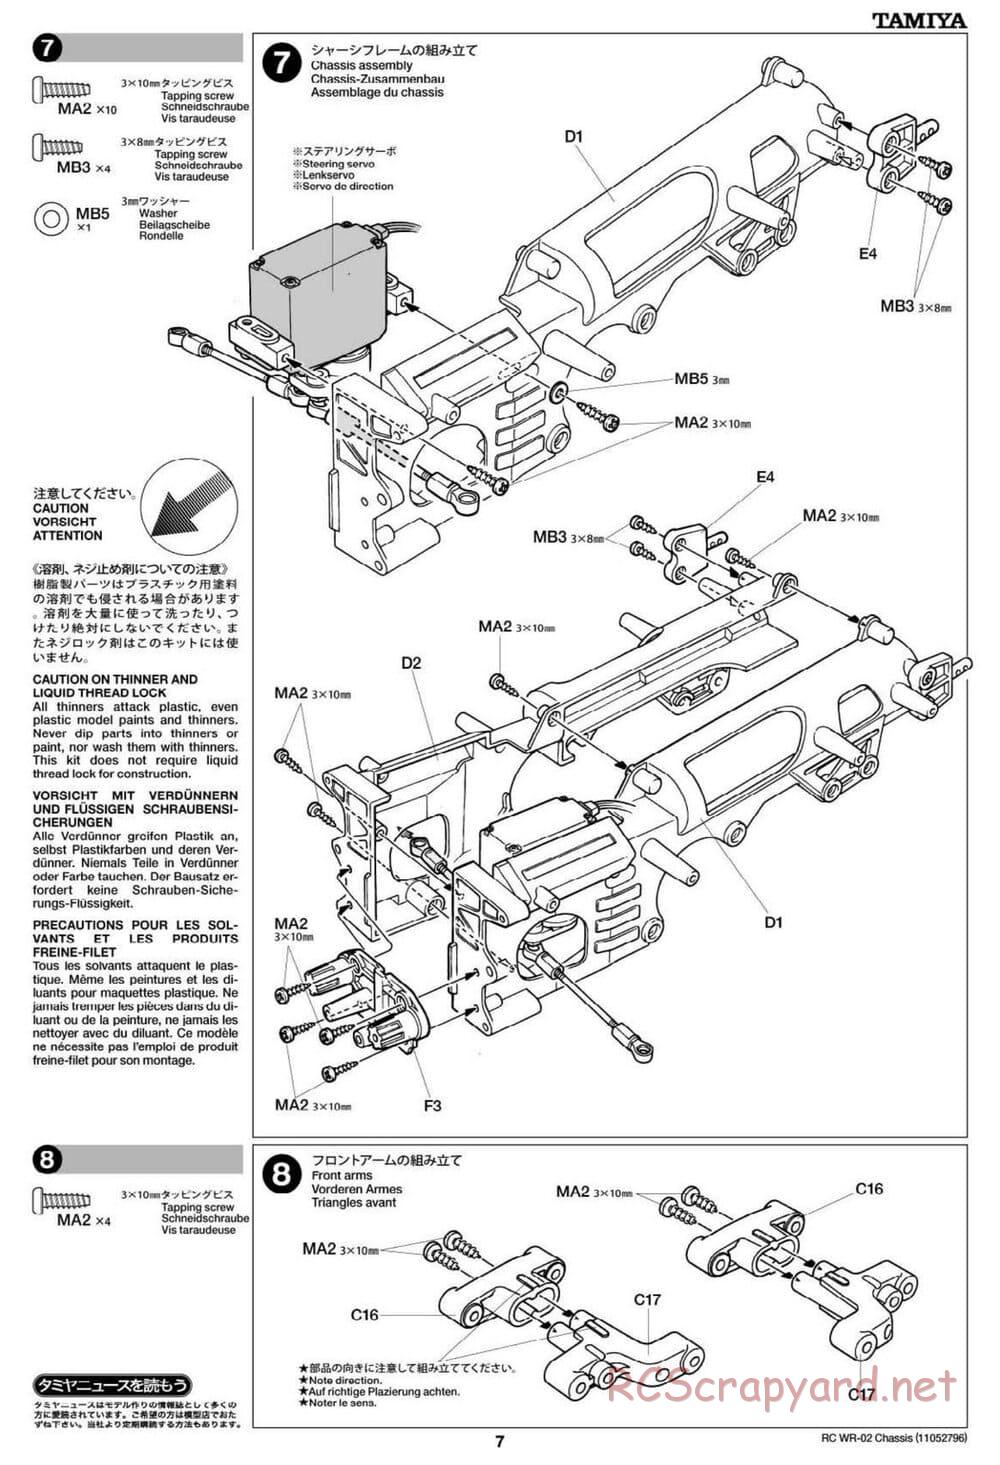 Tamiya - VW Type 2 Wheelie (T1) - WR-02 Chassis - Manual - Page 7